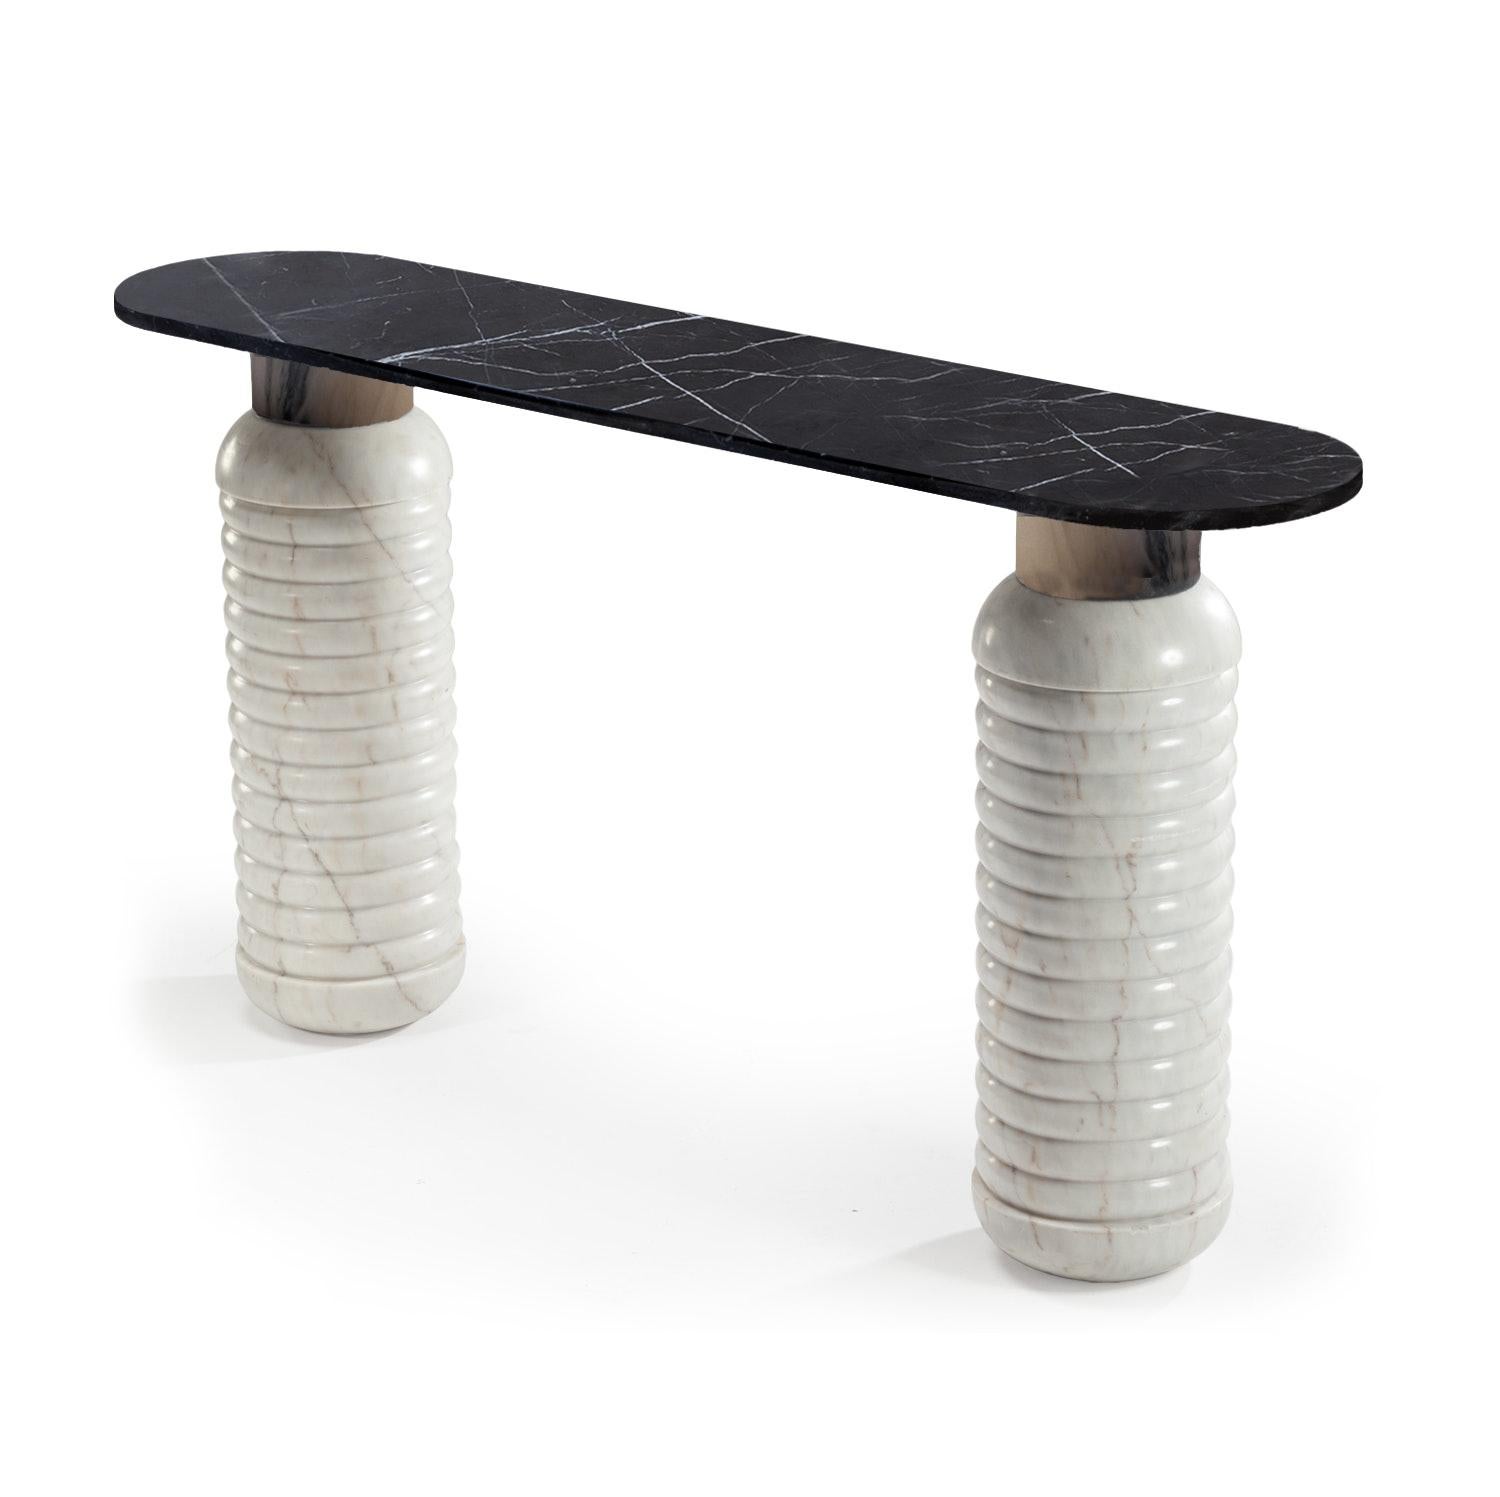 Jean console is unique in its conception. The combination of three different marbles makes it a sign of unconformity and originality. The combination in the picture is in Terrazzo top, Nero Marquina middle part and Estremoz White marble